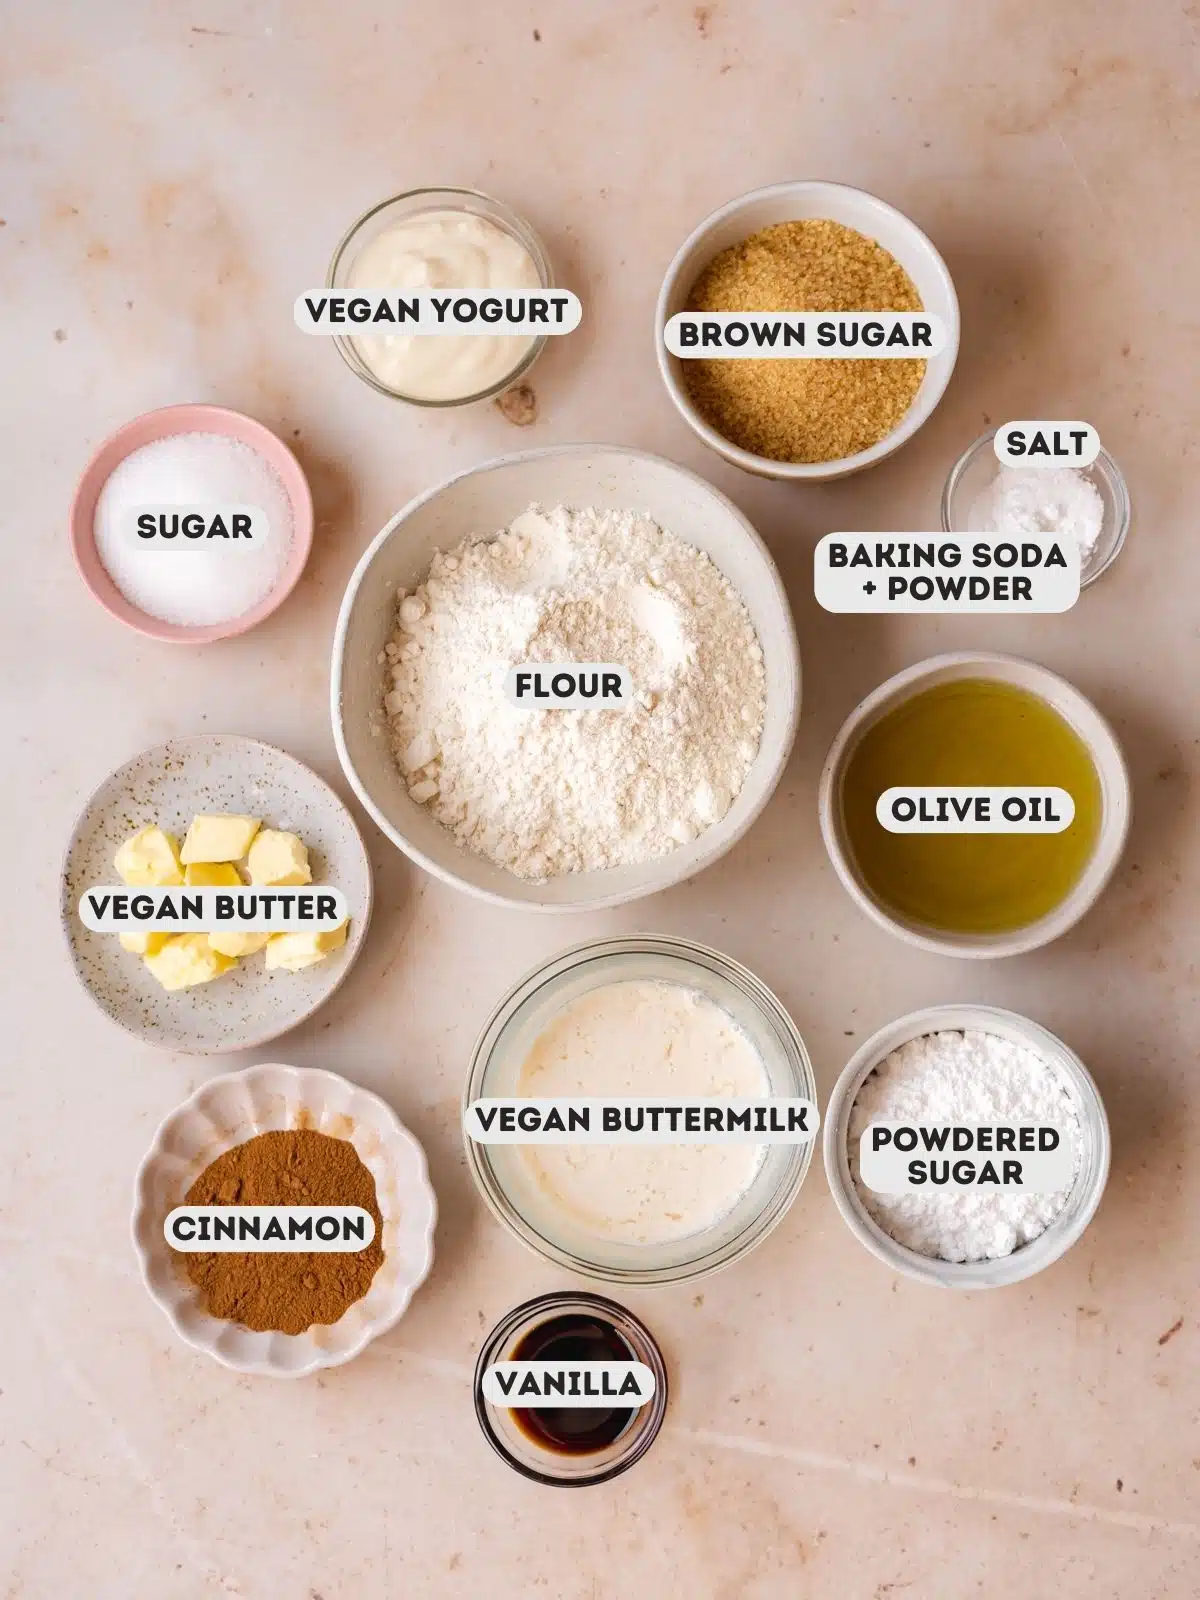 Overhead shot of the ingredients needed to make vegan cinnamon streusel muffins measured out into bowls on a tan table with text overlay.